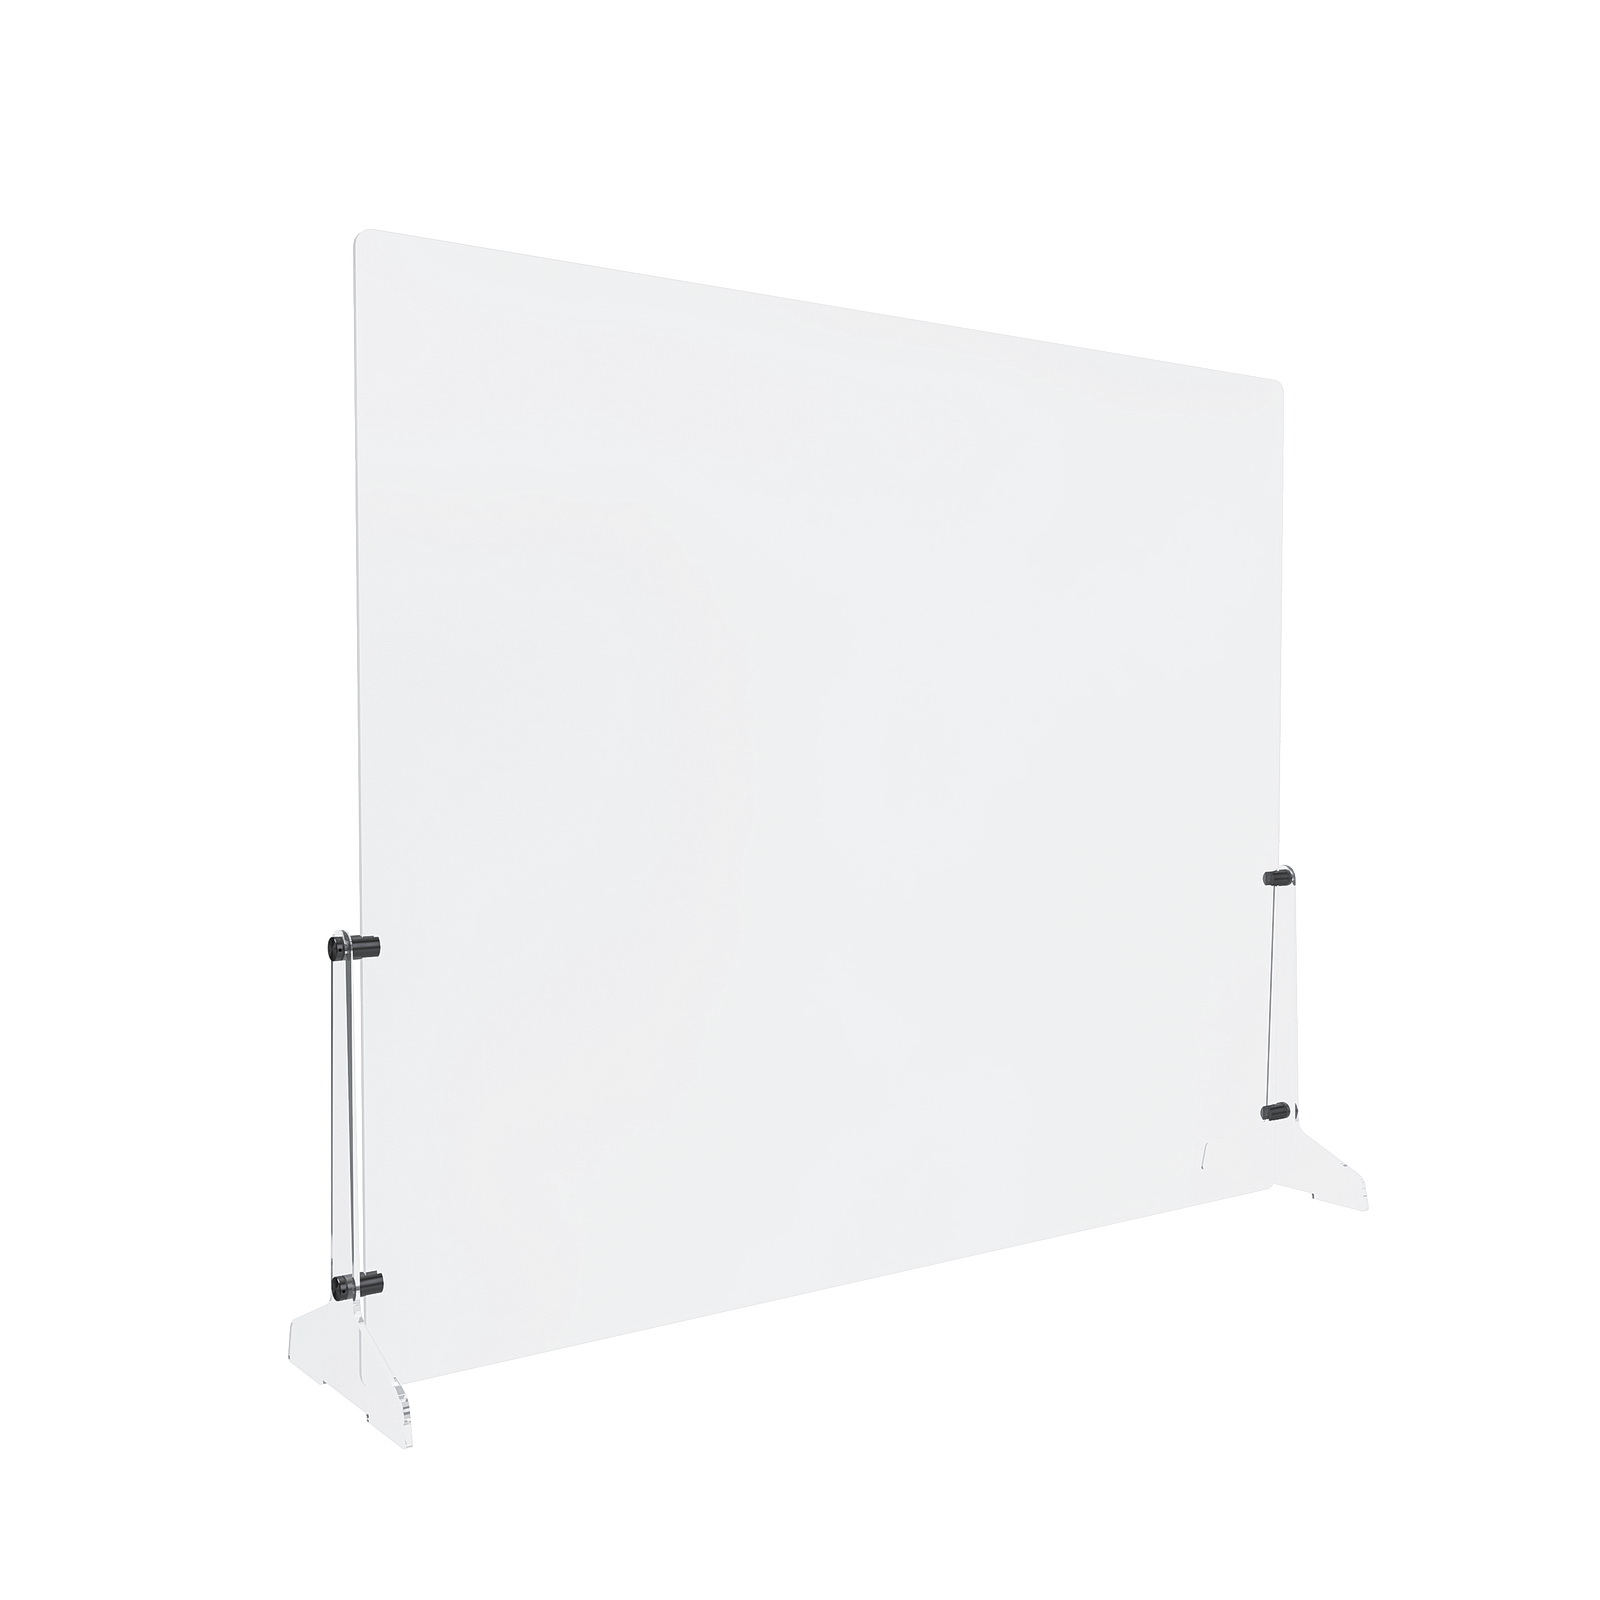 Clear Acrylic Sneeze Guard 36'' Wide x 30'' Tall, with (2) 7'' Wide x 12-5/16'' Deep Feet on the Side, and (4) Aluminum Black Anodized Forks / Standoffs.